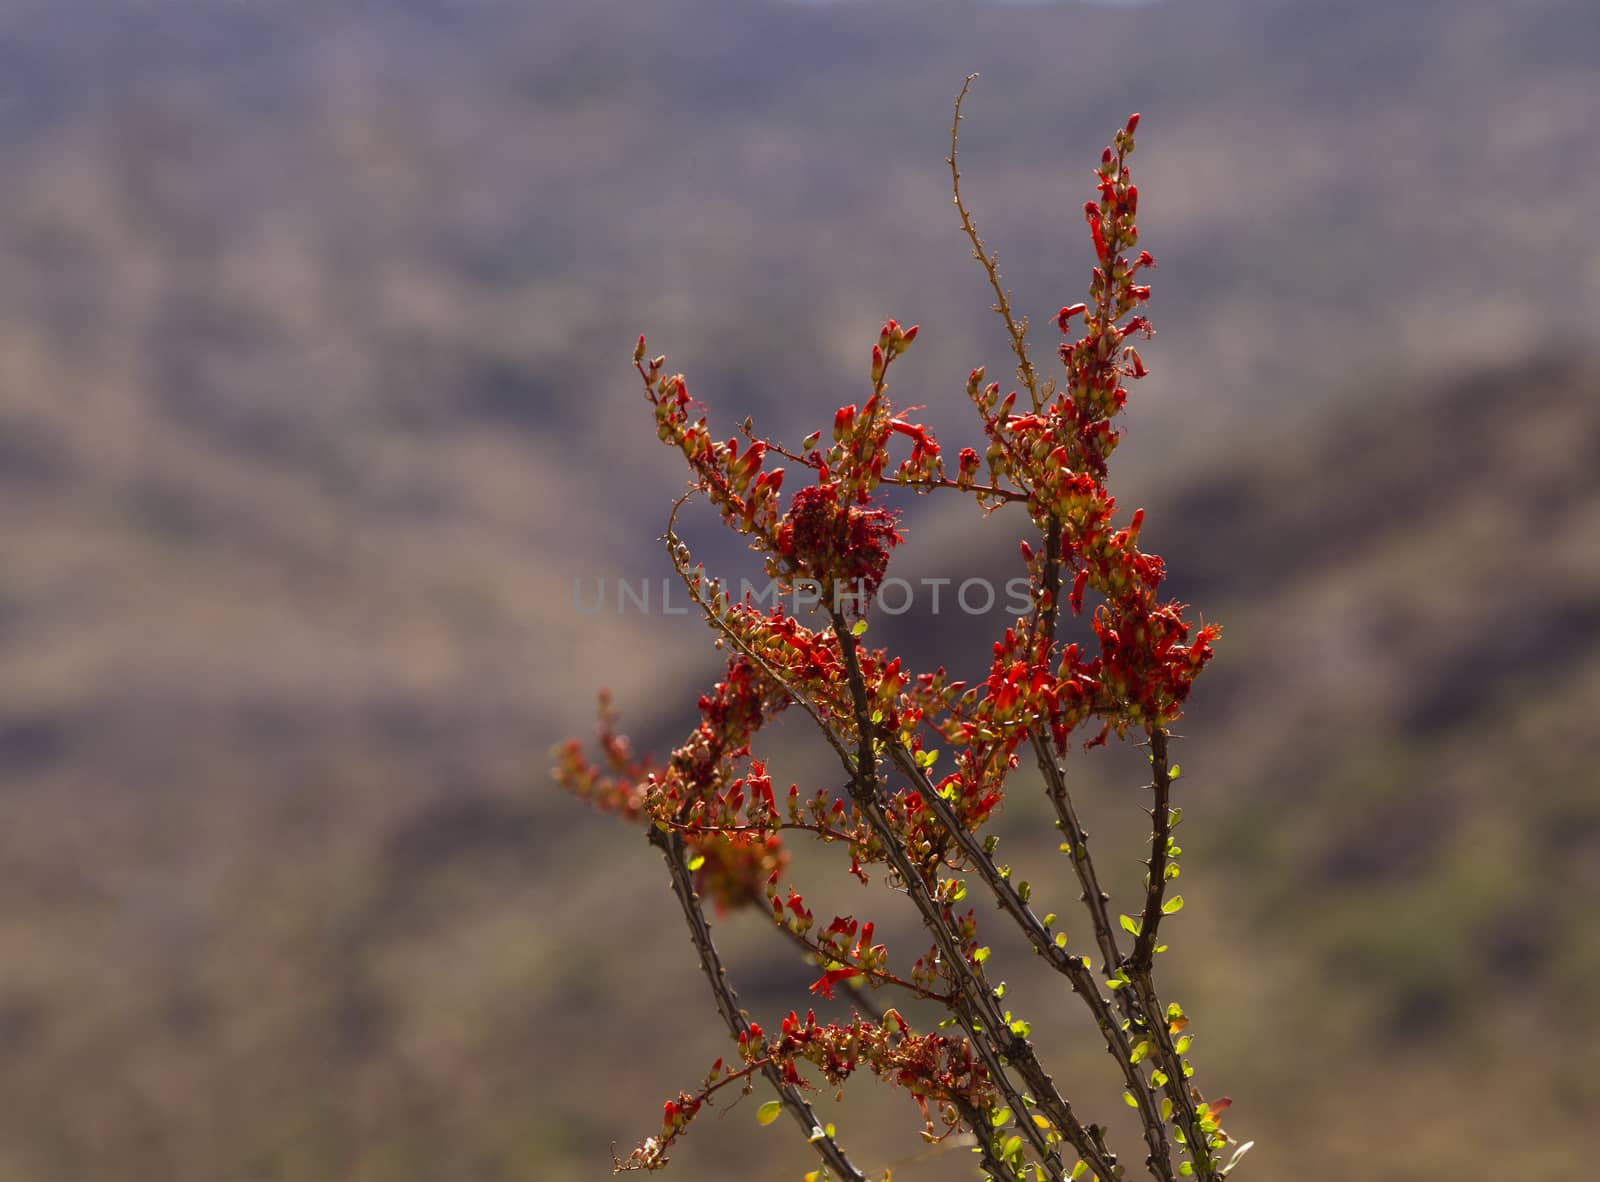 Blooming flowers on ocotillo cactus canes in selective focus against Rincon Mountains. Location is Saguaro National Park, East division, viewed from along Cactus Forest Drive.  Nicknames include coachwhip, flaming sword, and vine cactus.  